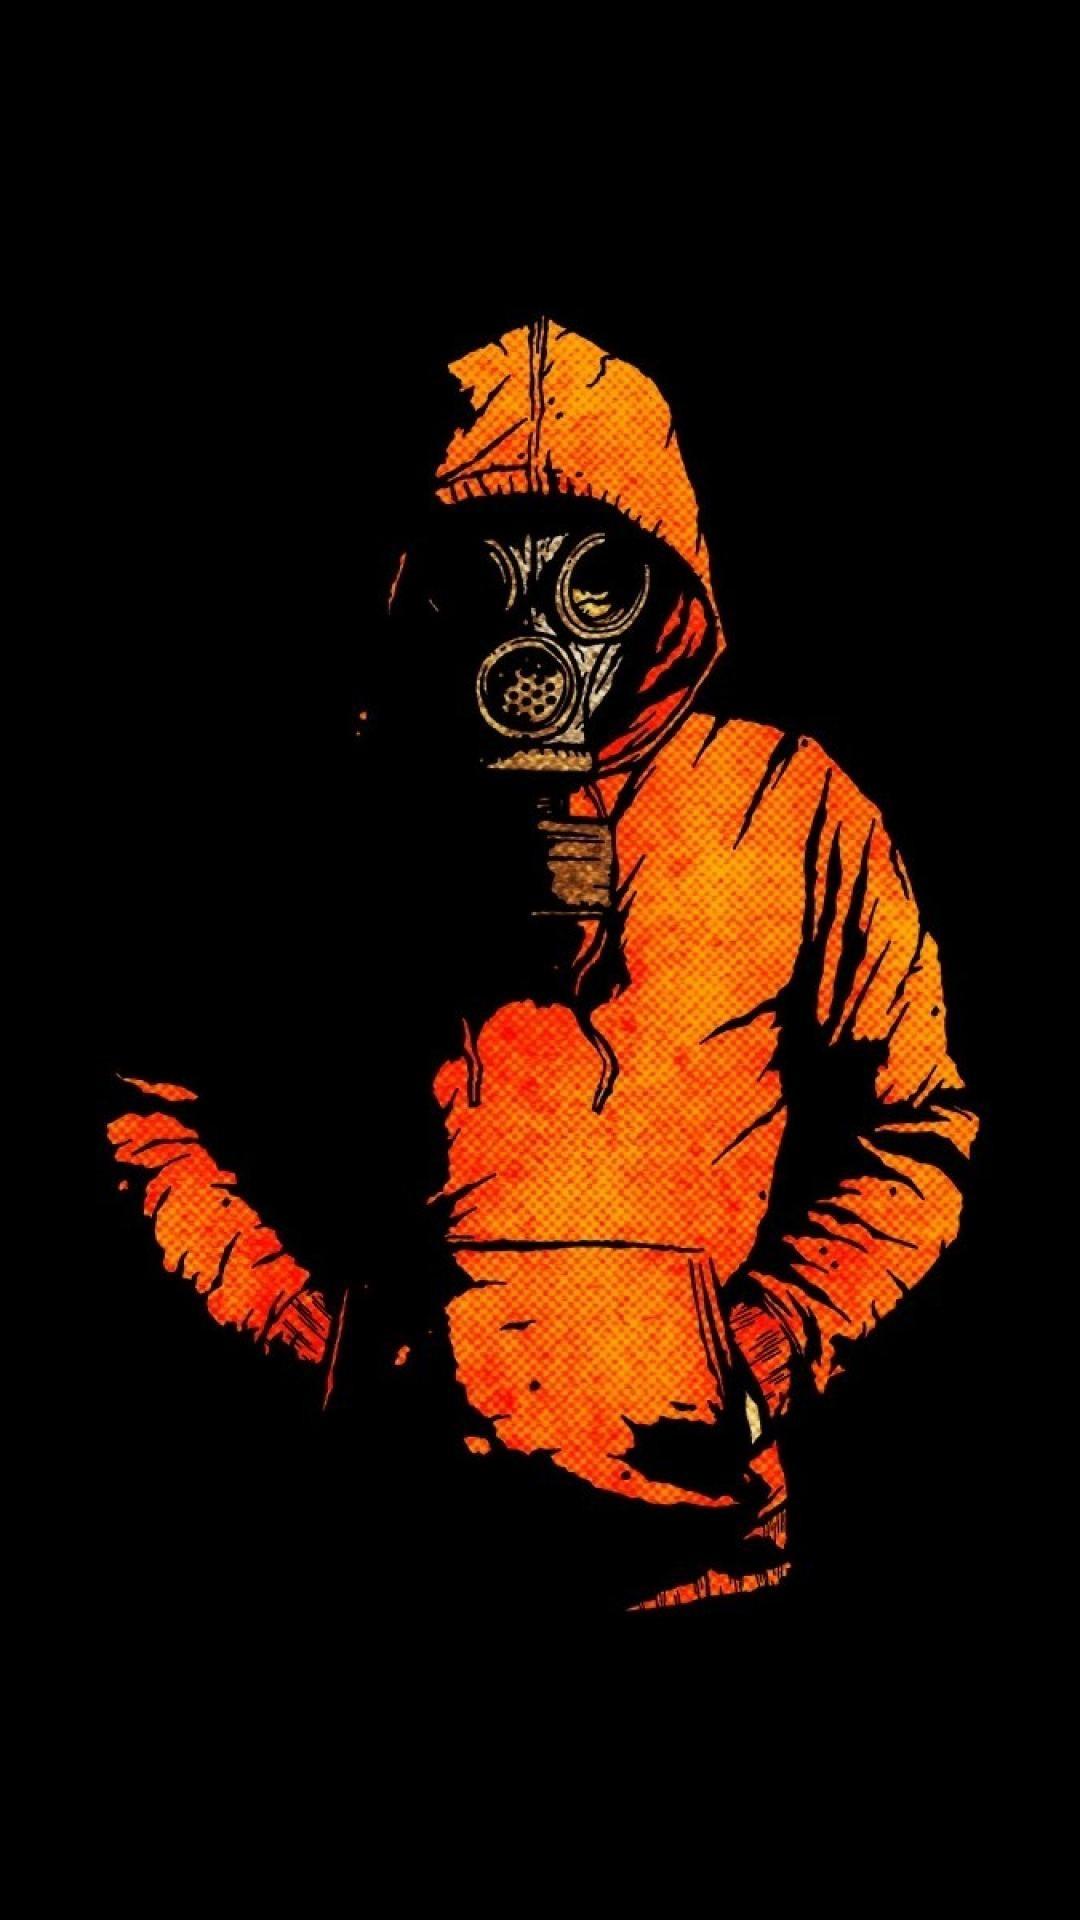 Gas Mask iPhone Wallpaper with high-resolution 1080x1920 pixel. You can use this wallpaper for your iPhone 5, 6, 7, 8, X, XS, XR backgrounds, Mobile Screensaver, or iPad Lock Screen - Dark orange